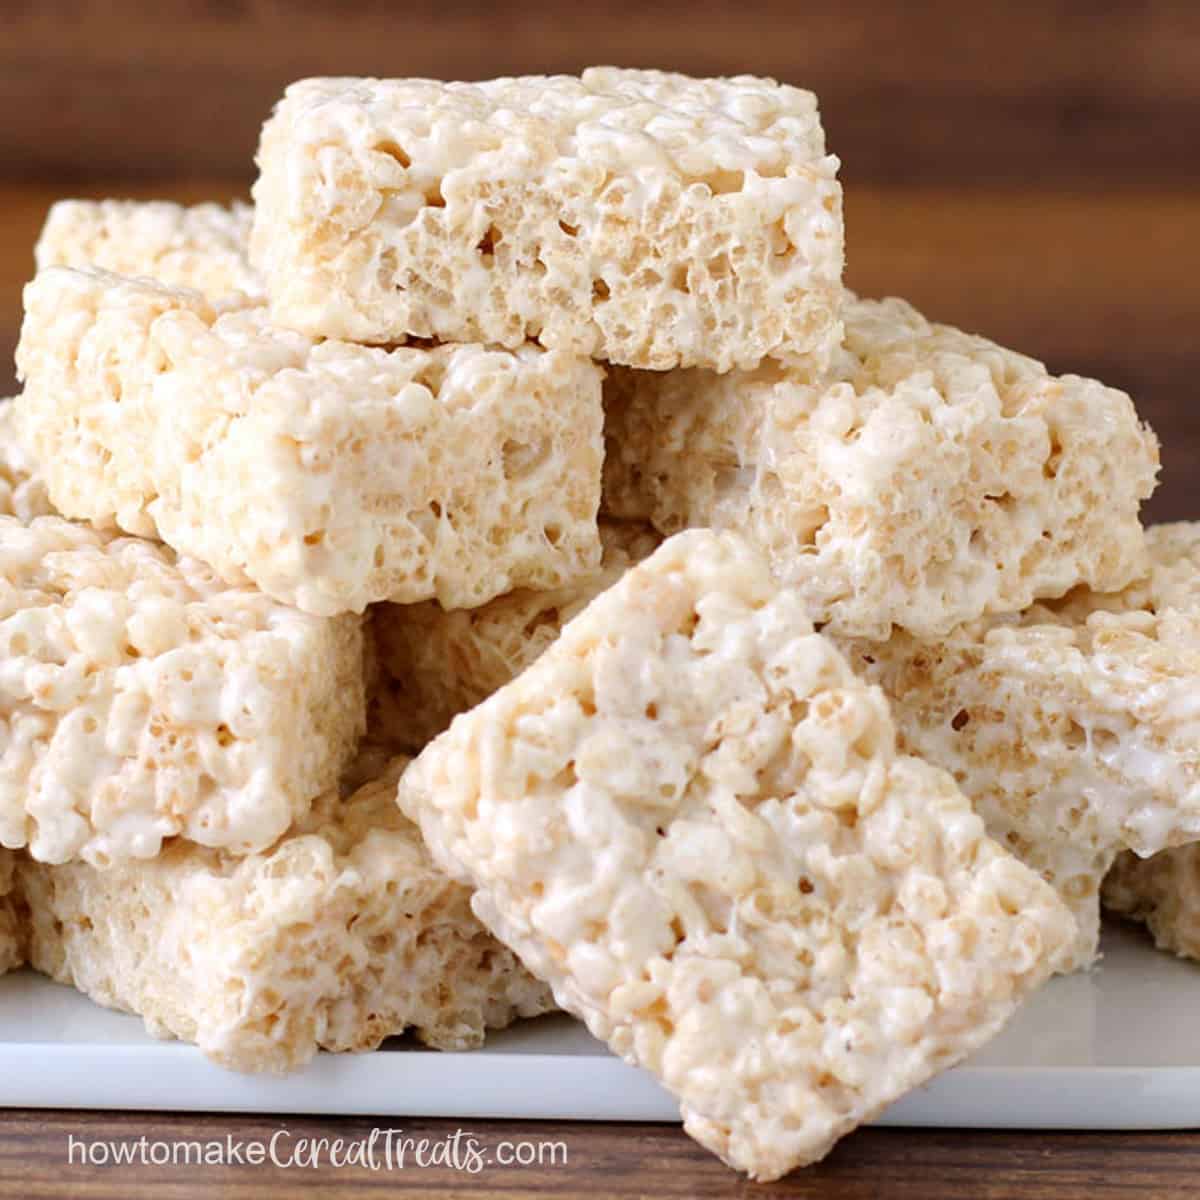 We taste tested 20 recipes to find the BEST Rice Krispie Treats